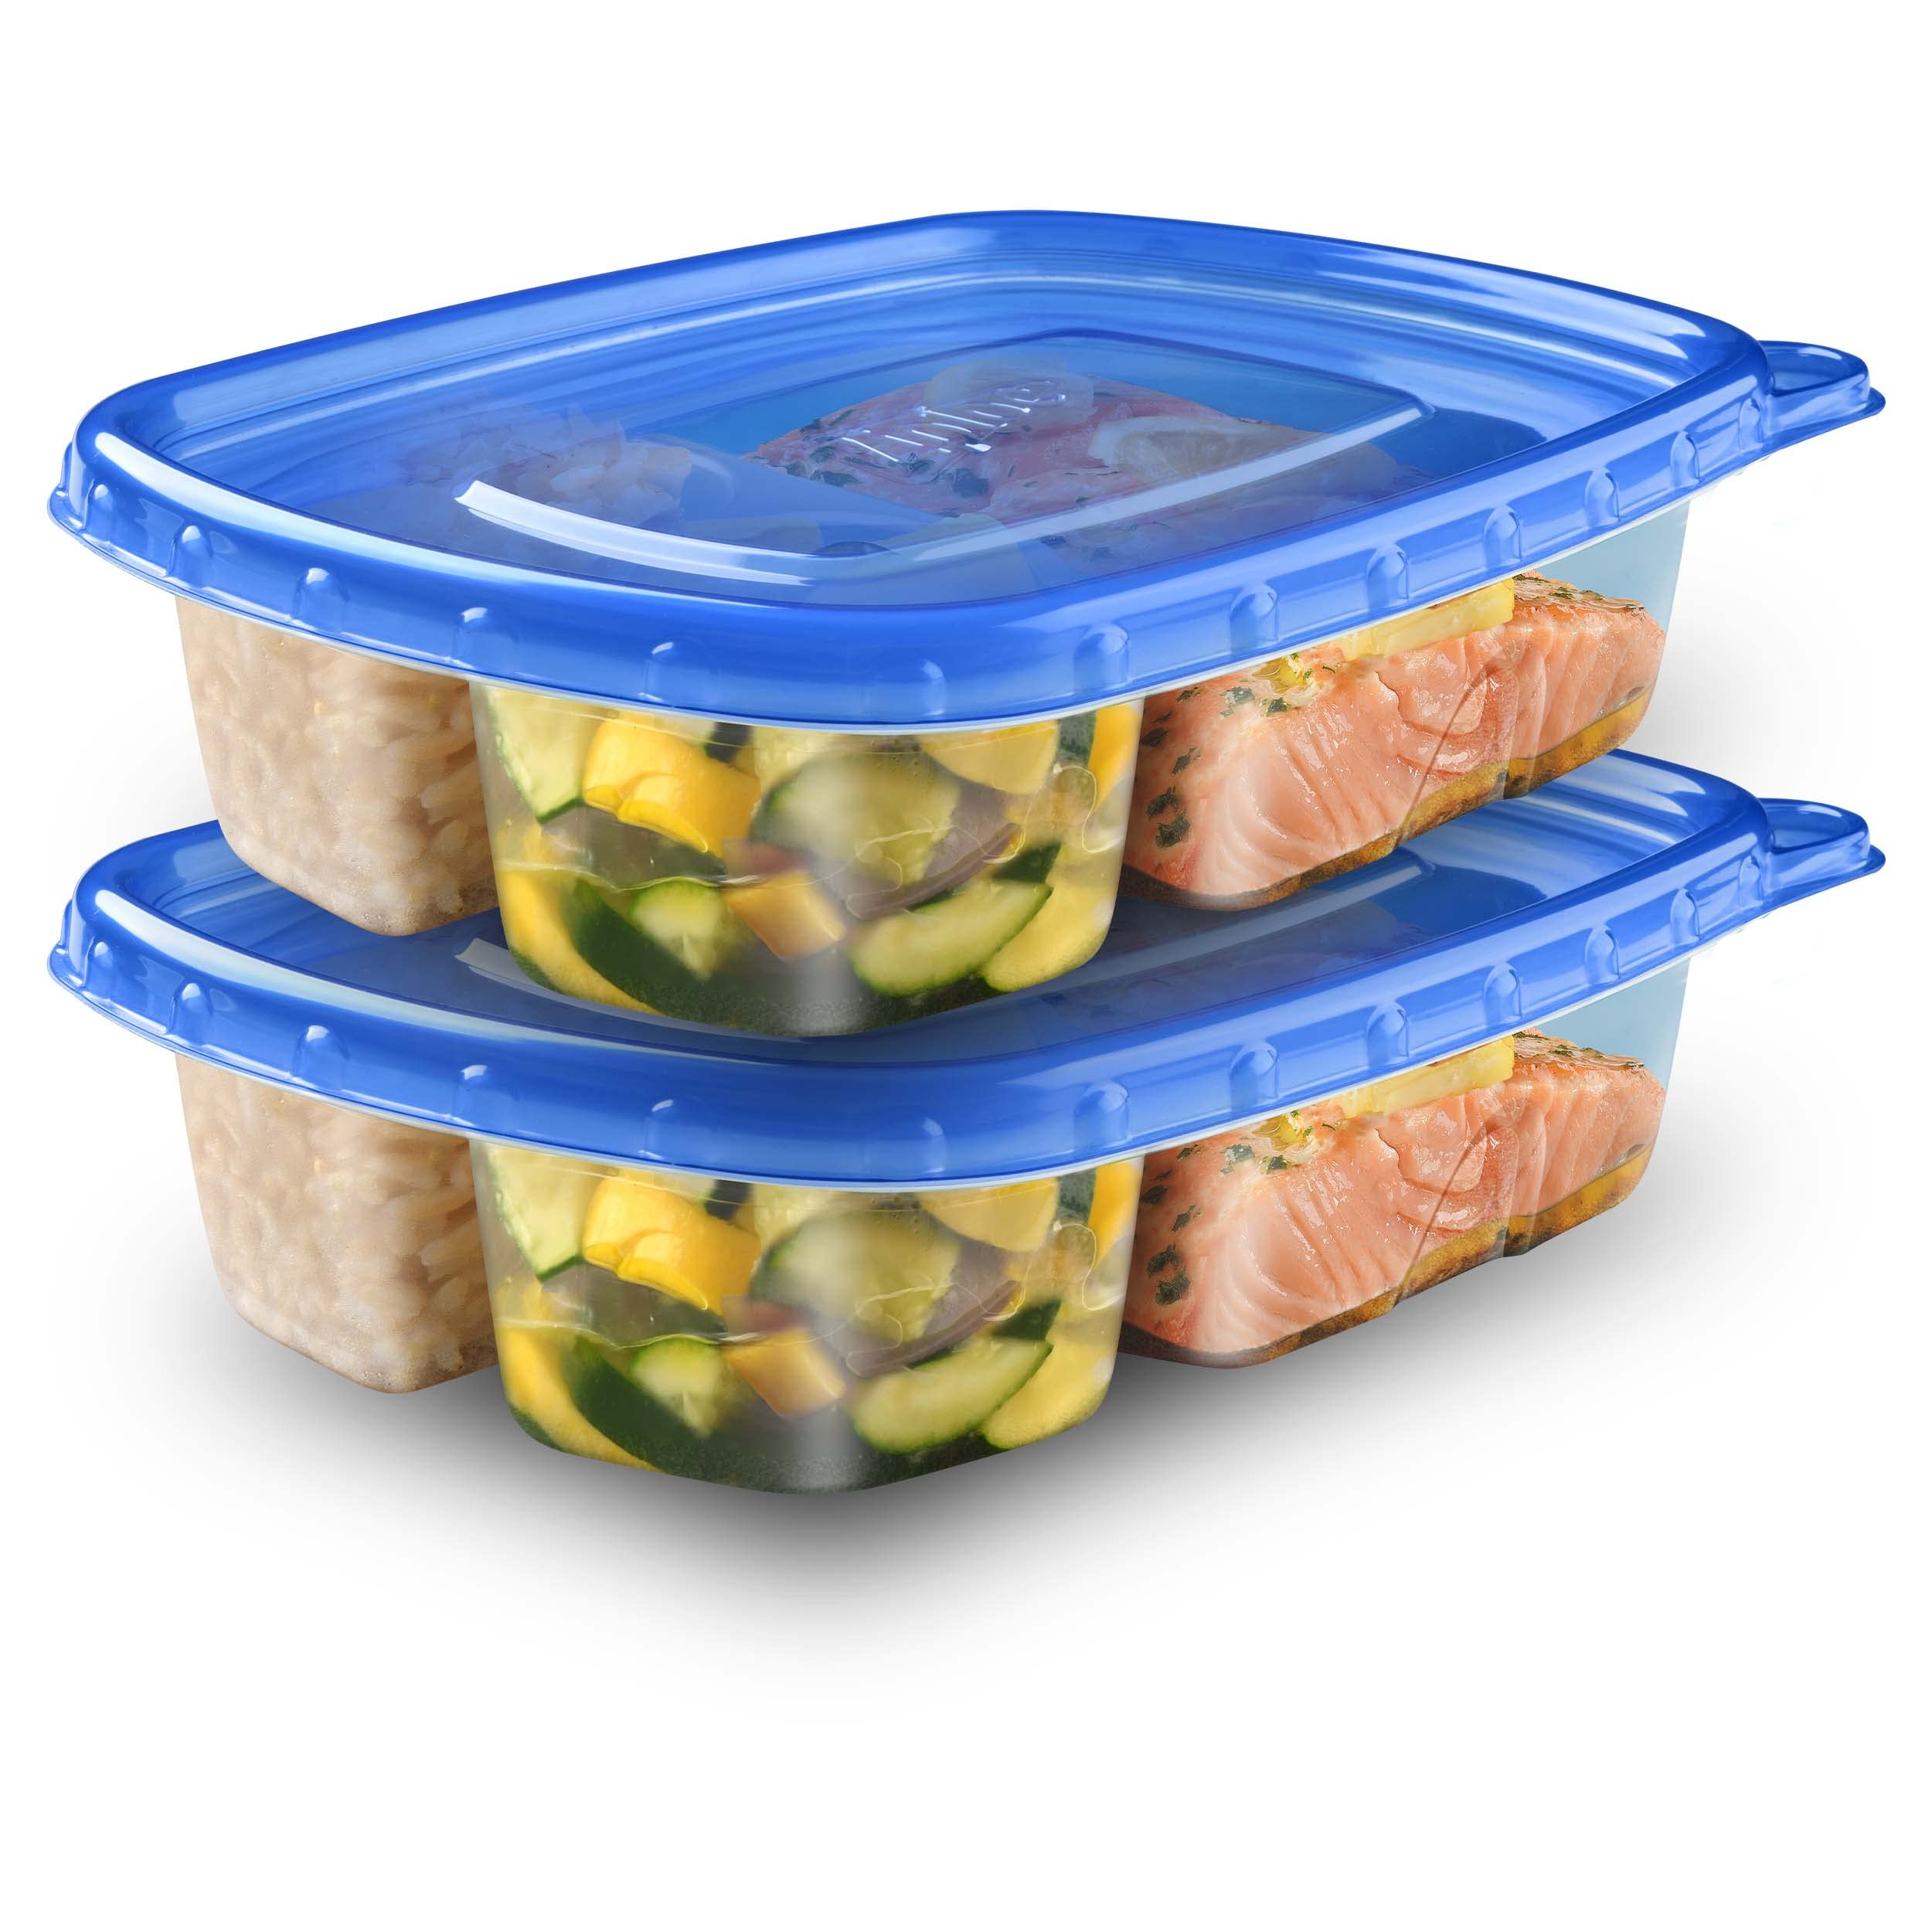 Ziploc Reusable Food Storage Containers: Smart Snap, Dishwasher Safe